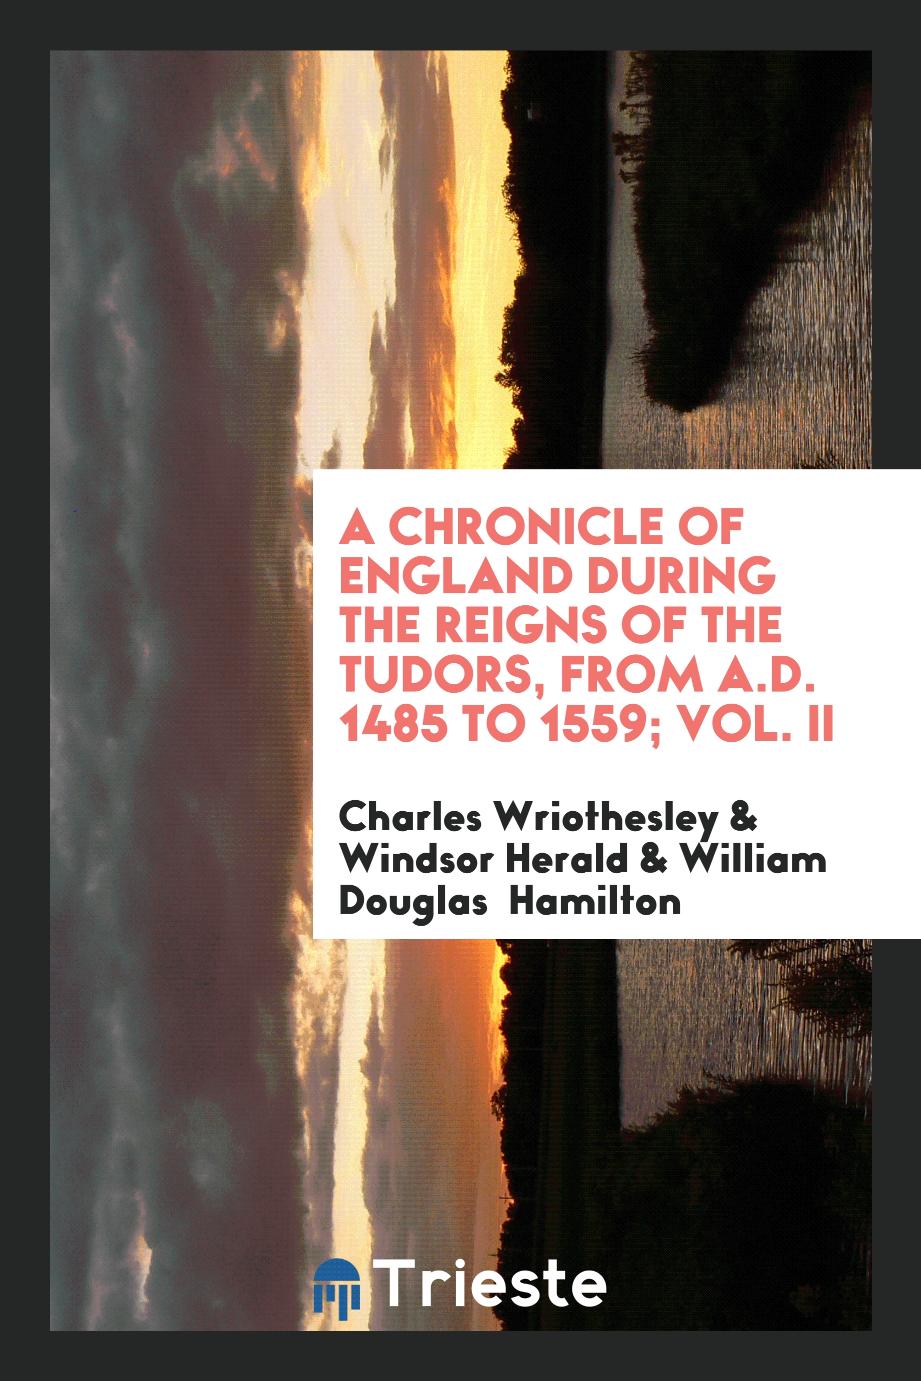 A Chronicle of England During the Reigns of the Tudors, from A.D. 1485 to 1559; Vol. II